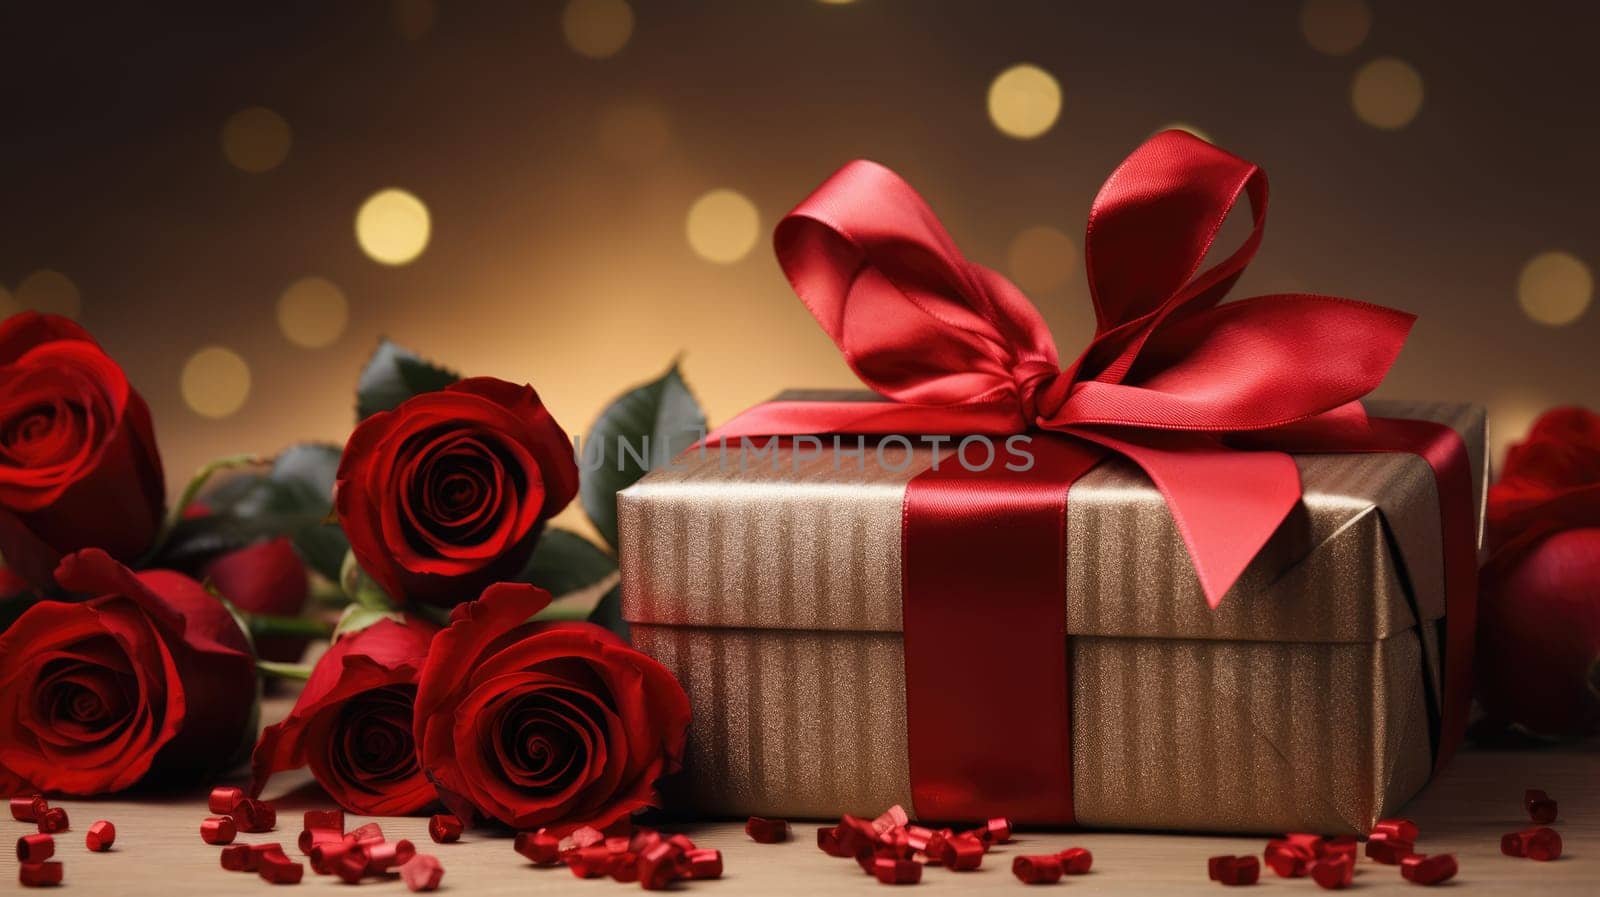 Valentine's day romantic gift, bouquet of red roses on wooden background. Greeting card. by JuliaDorian